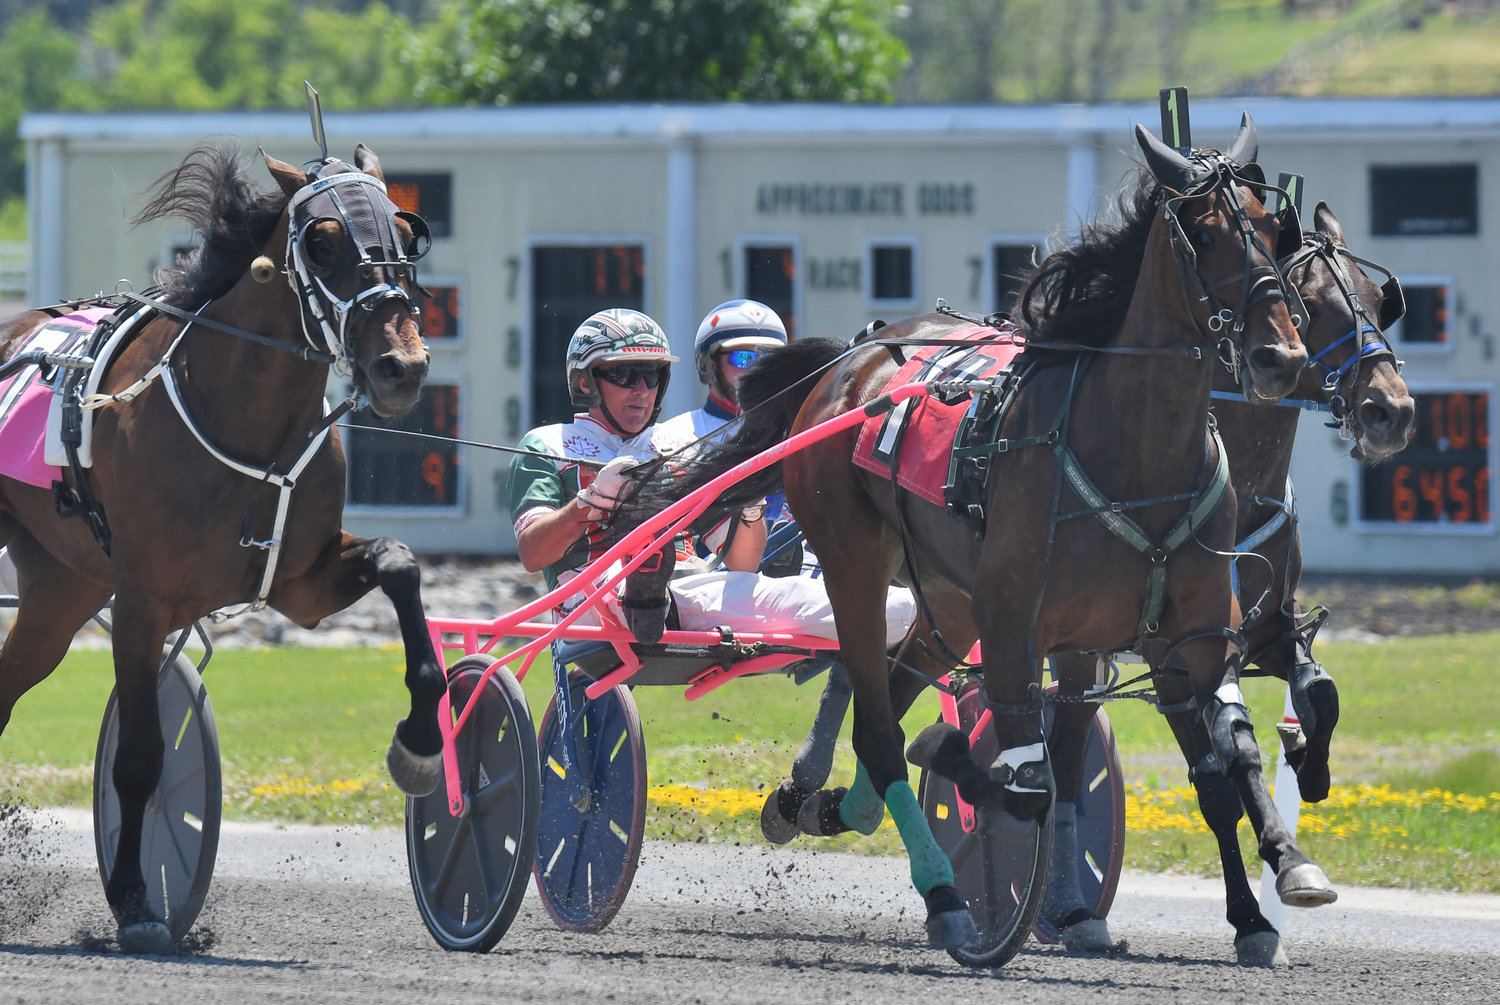 In the first race on Monday afternoon at Vernon Downs, Fashion Princess (No. 1) with Gates Brunet driving won.